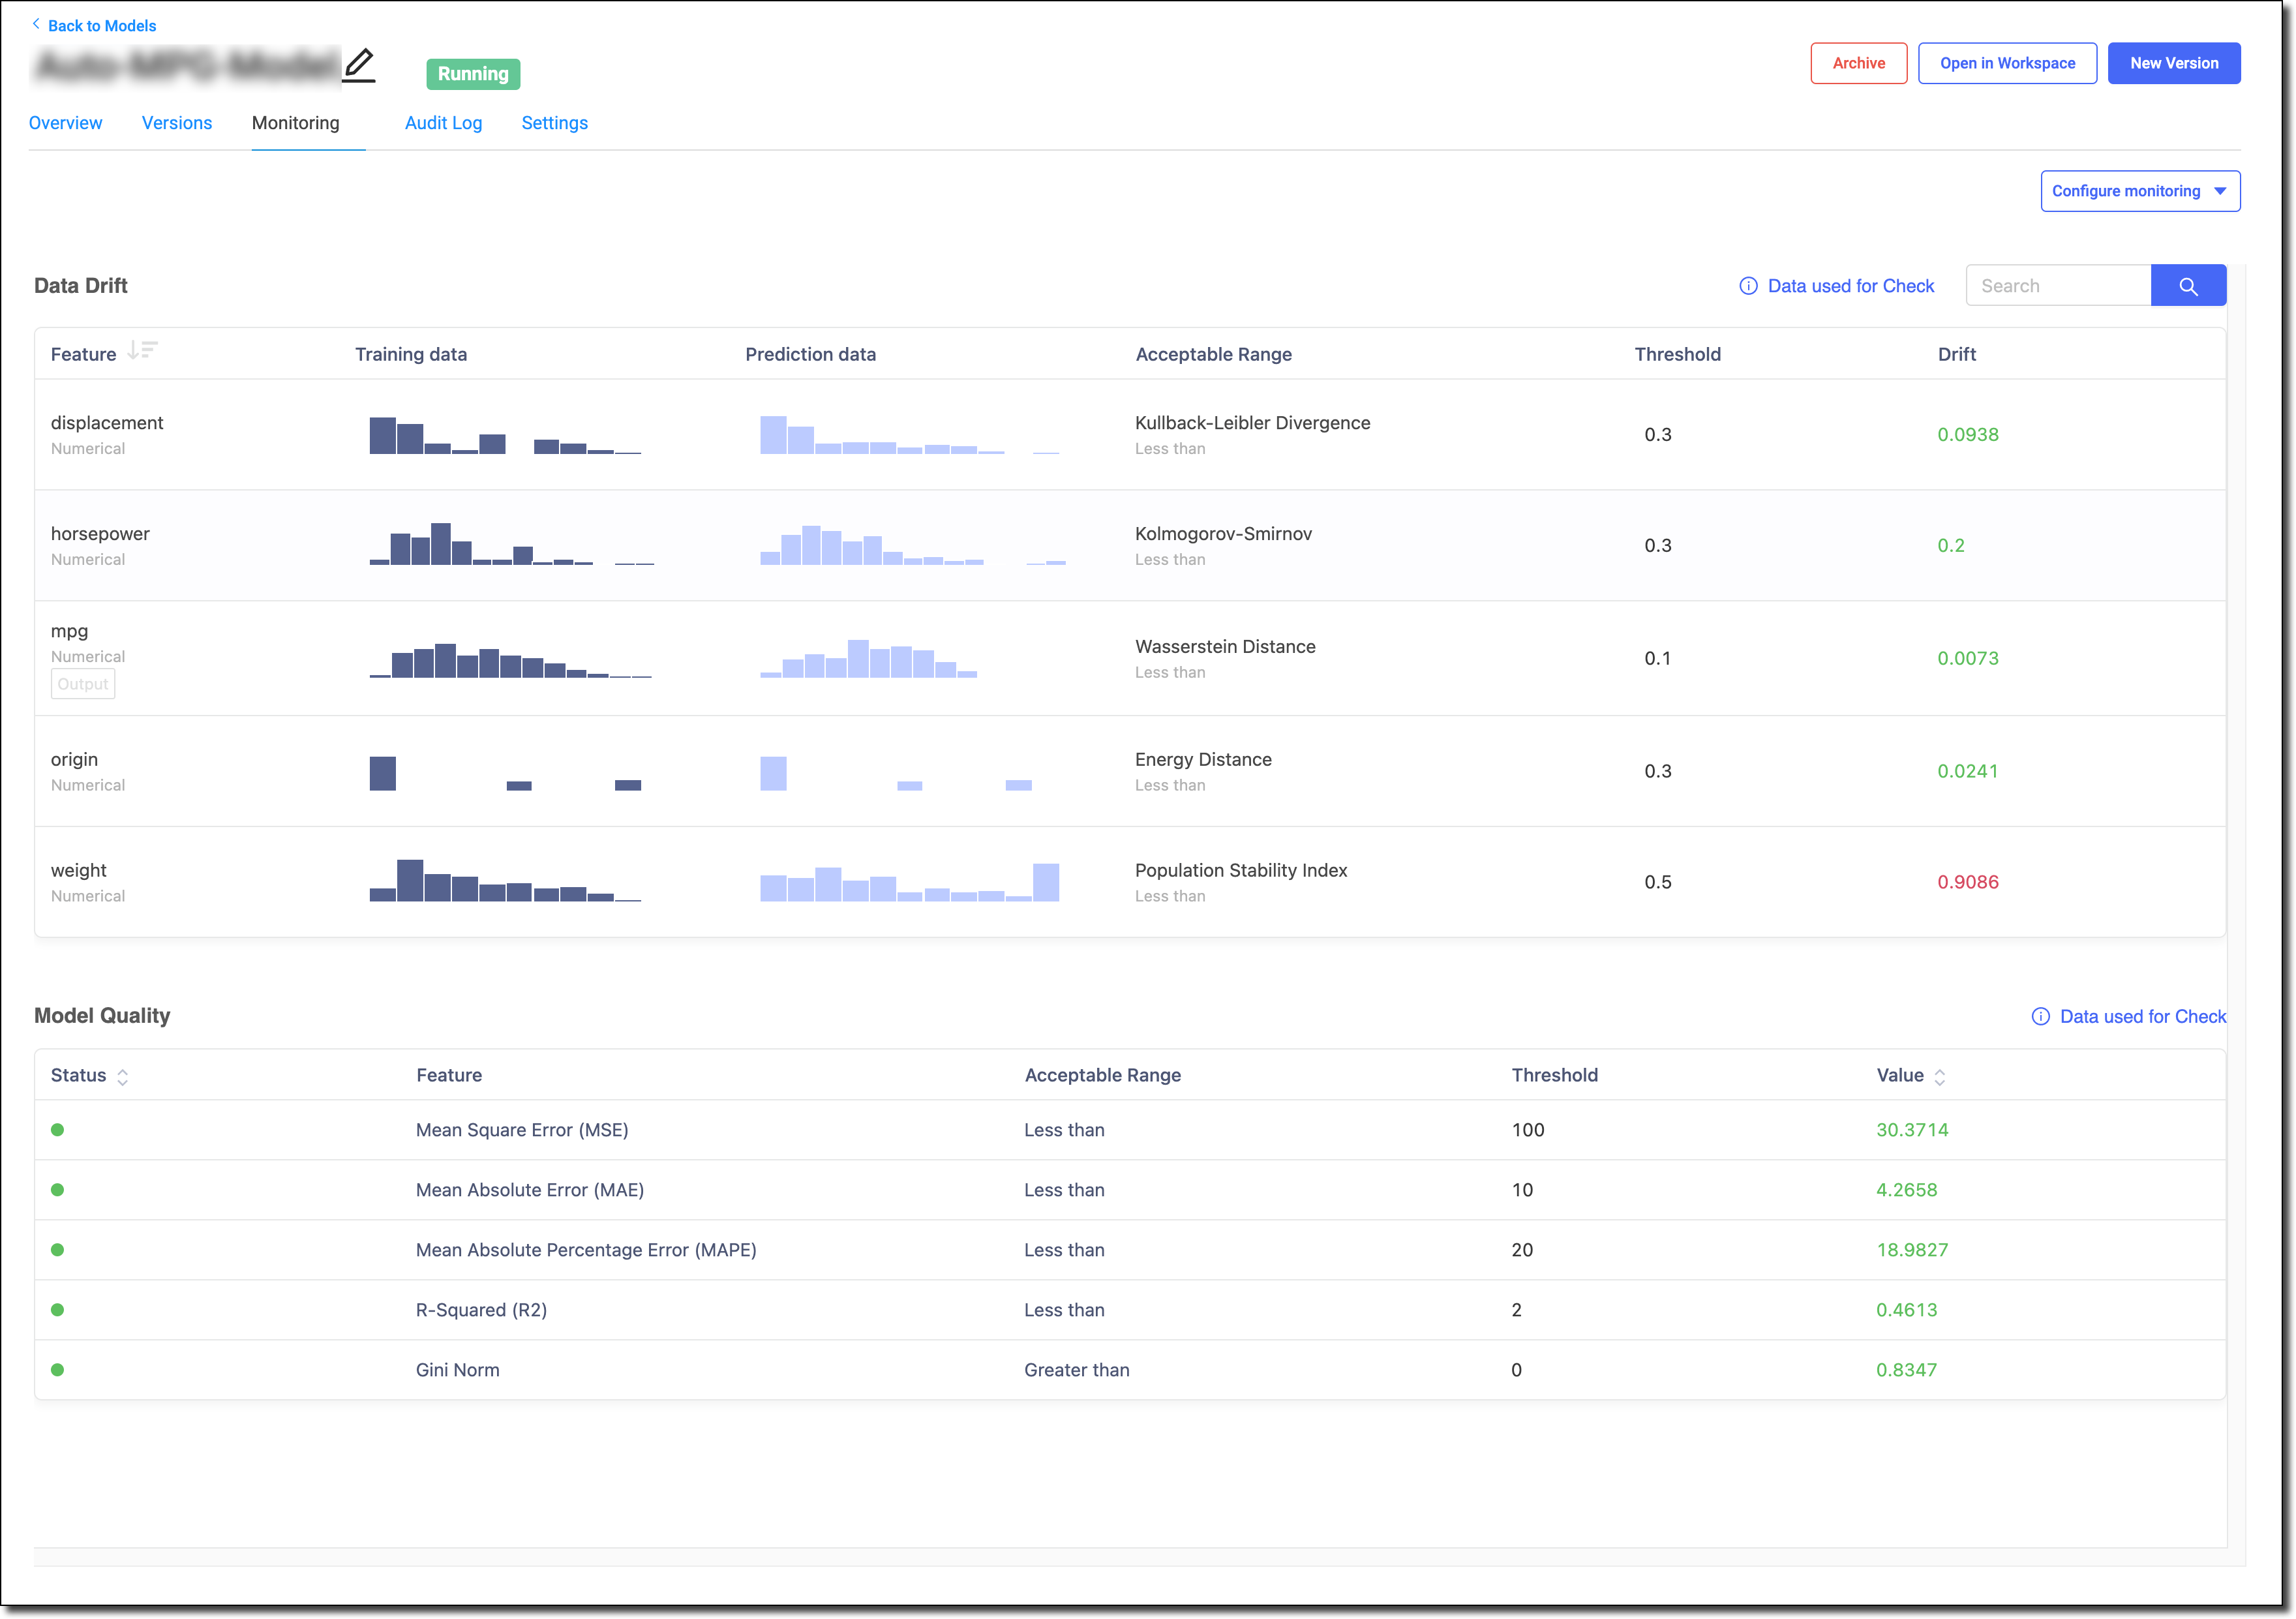 The Monitoring page shows data drift and model quality.